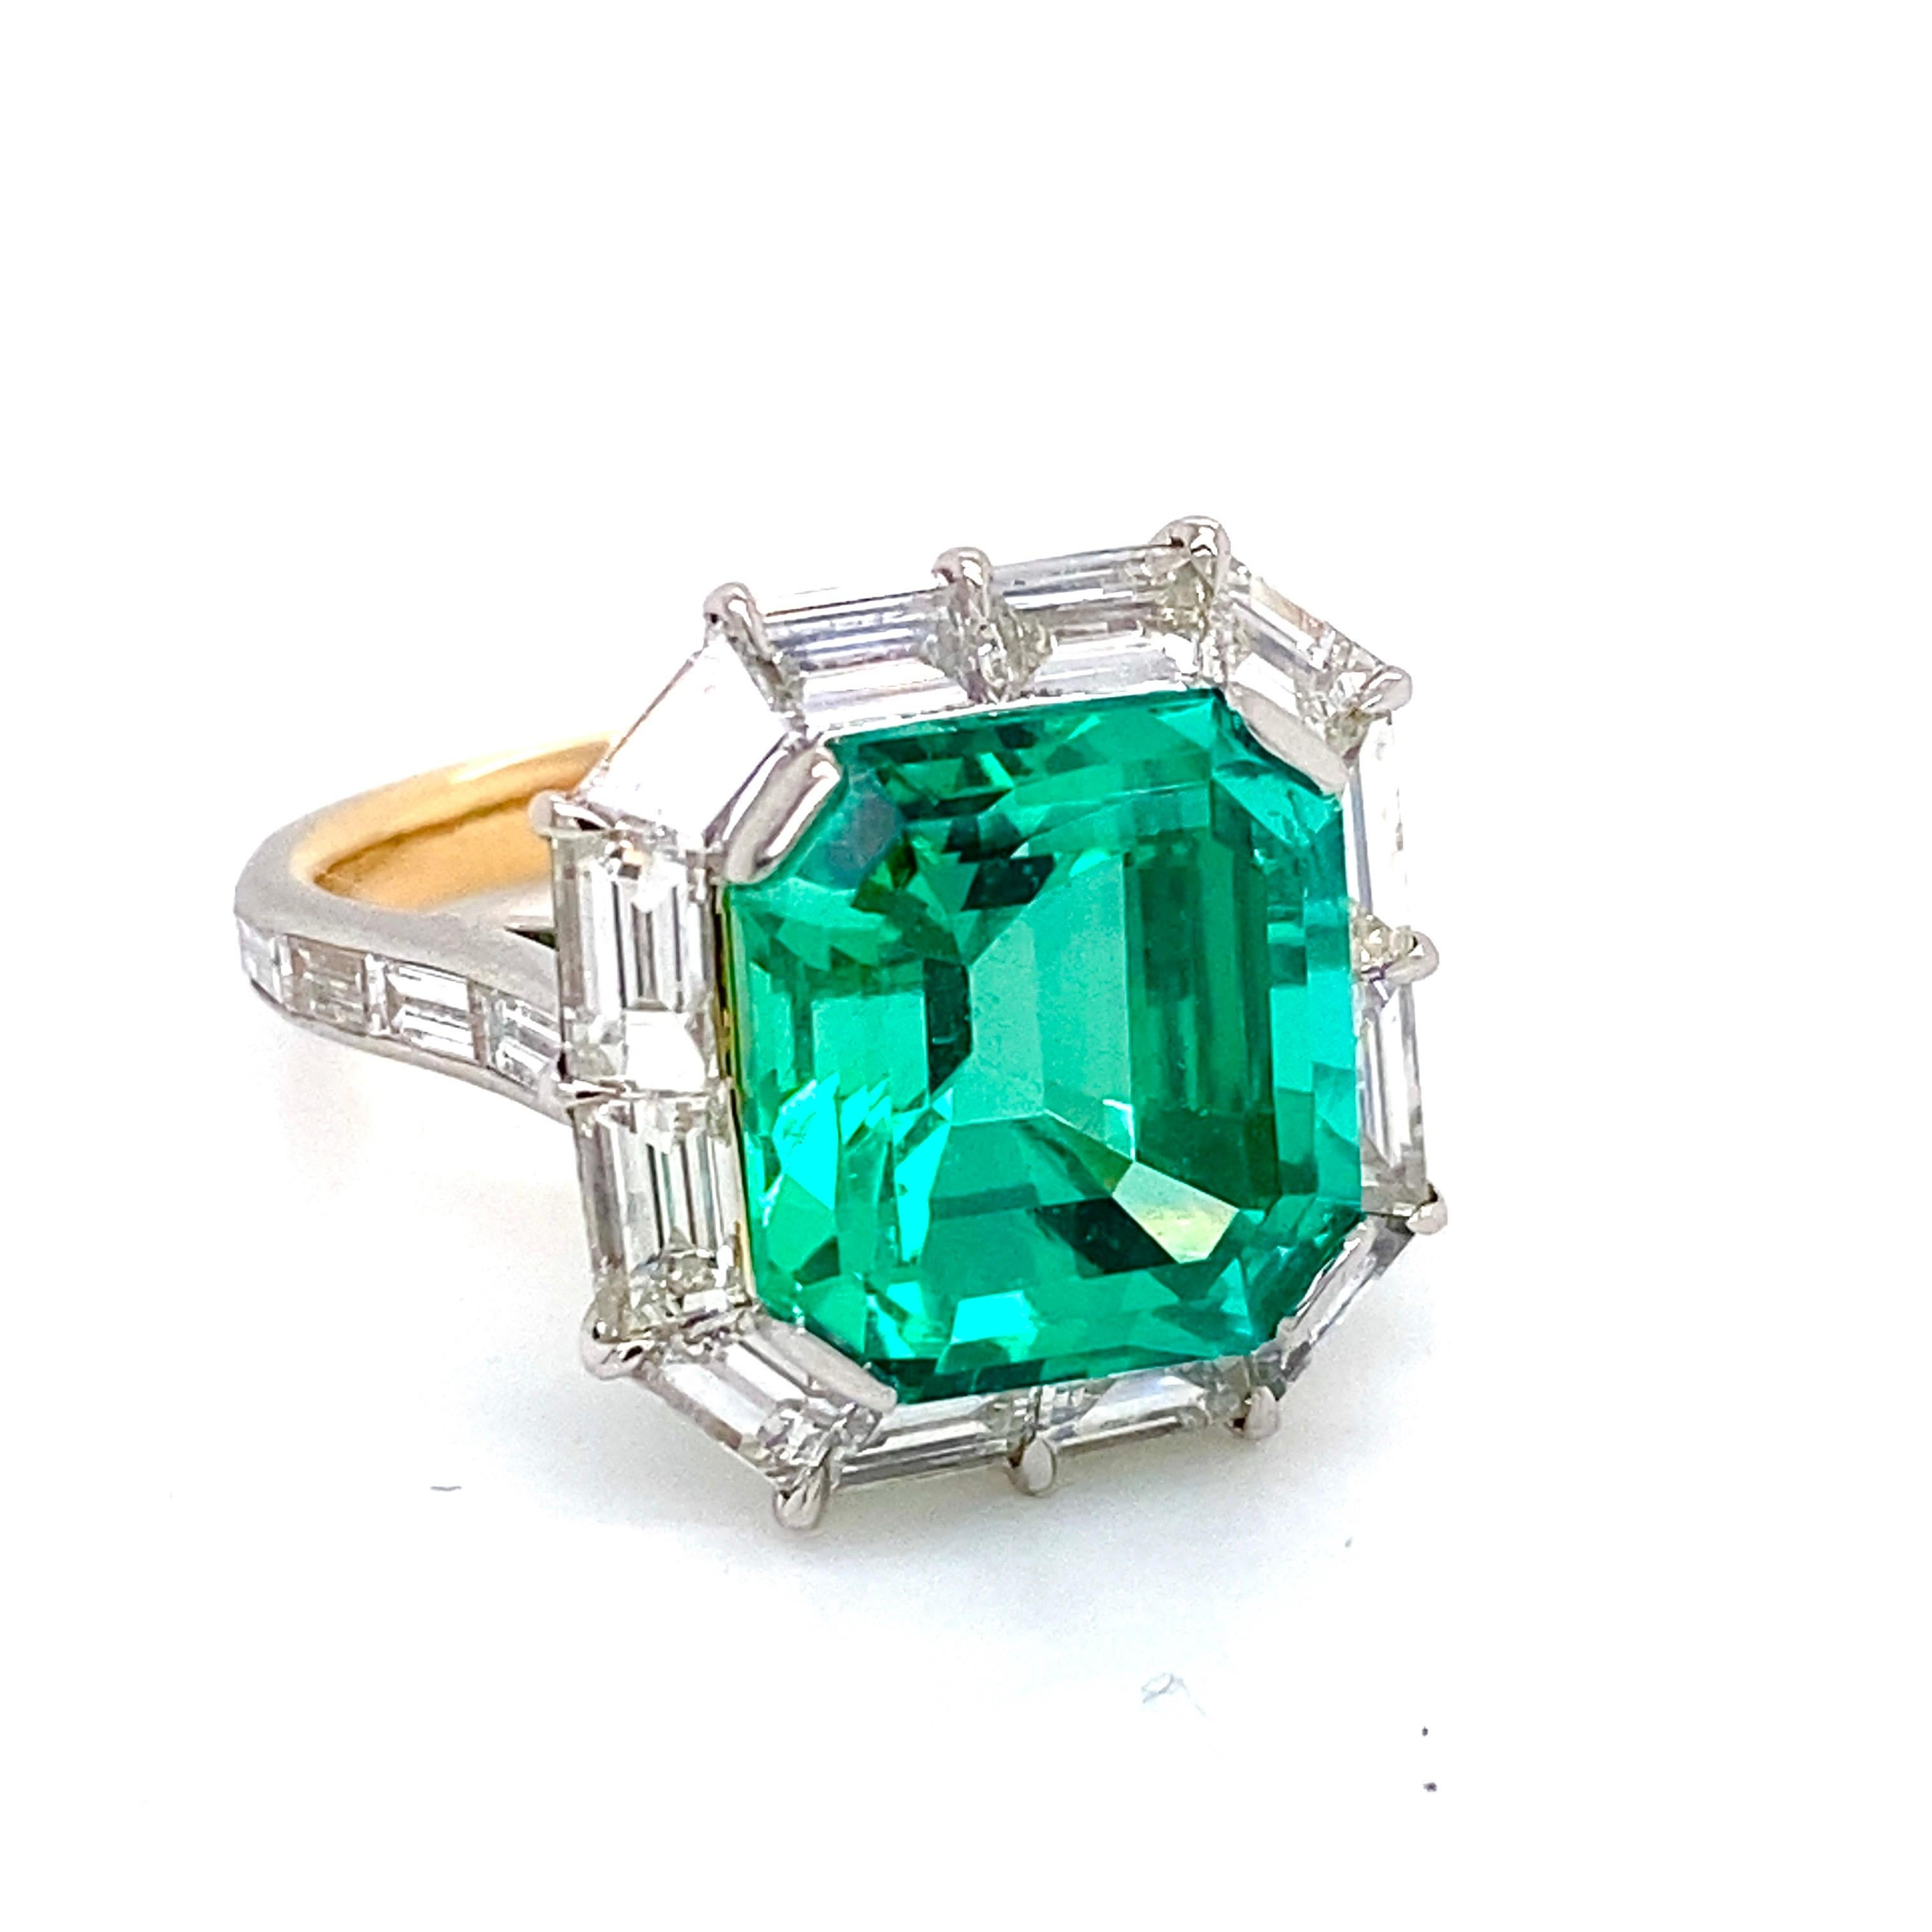 From the museum vault at Emilio Jewelry in New York,

Featuring the most prized Emeralds we have ever seen. The center stone is just above 7.00 carats. The color is of the most desirable found in Colombian emeralds because it is not overly dark, but